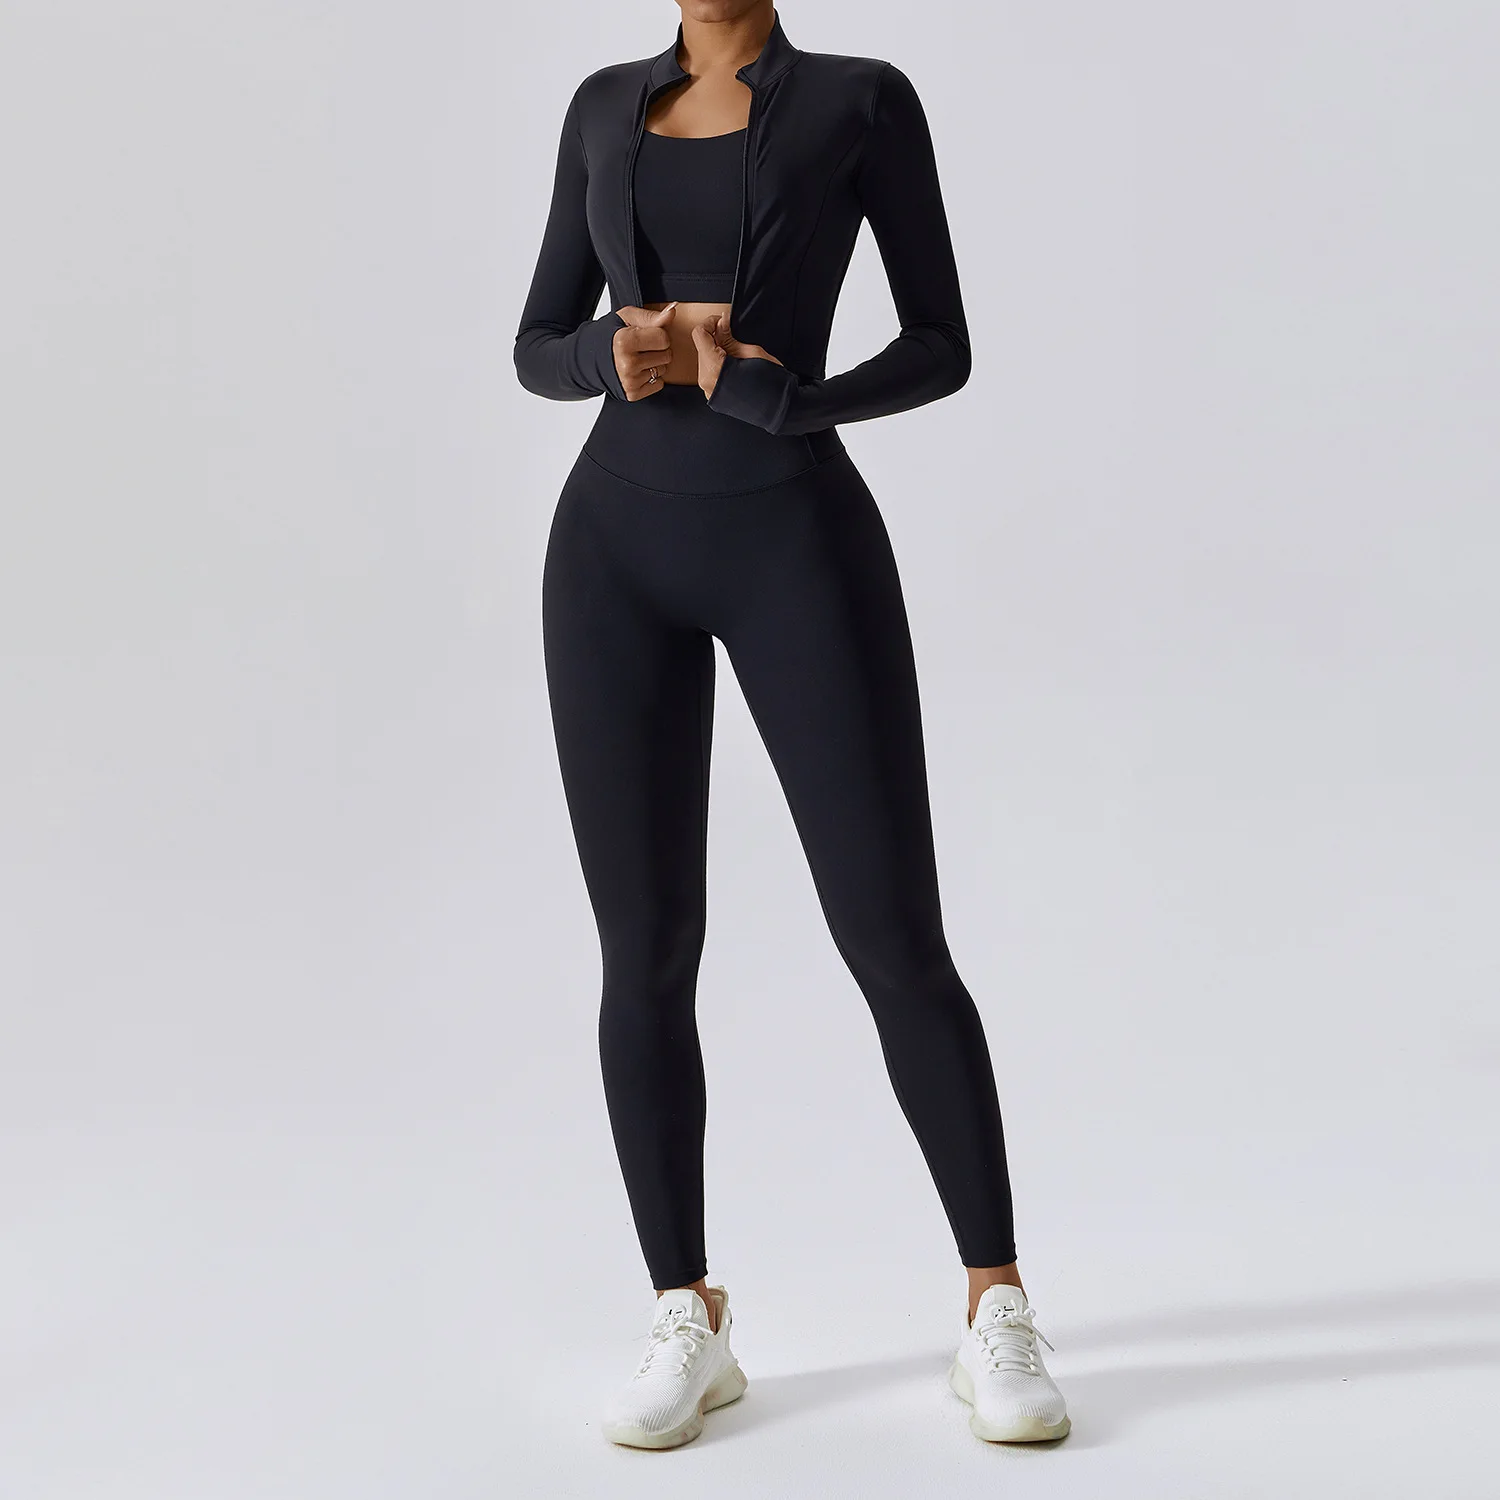 Seamless Athletic Wear Women Tracksuit Yoga Set 2 Pieces Workout Sportswear Gym  Clothing Fitness High Waist Leggings Sports Suit - AliExpress